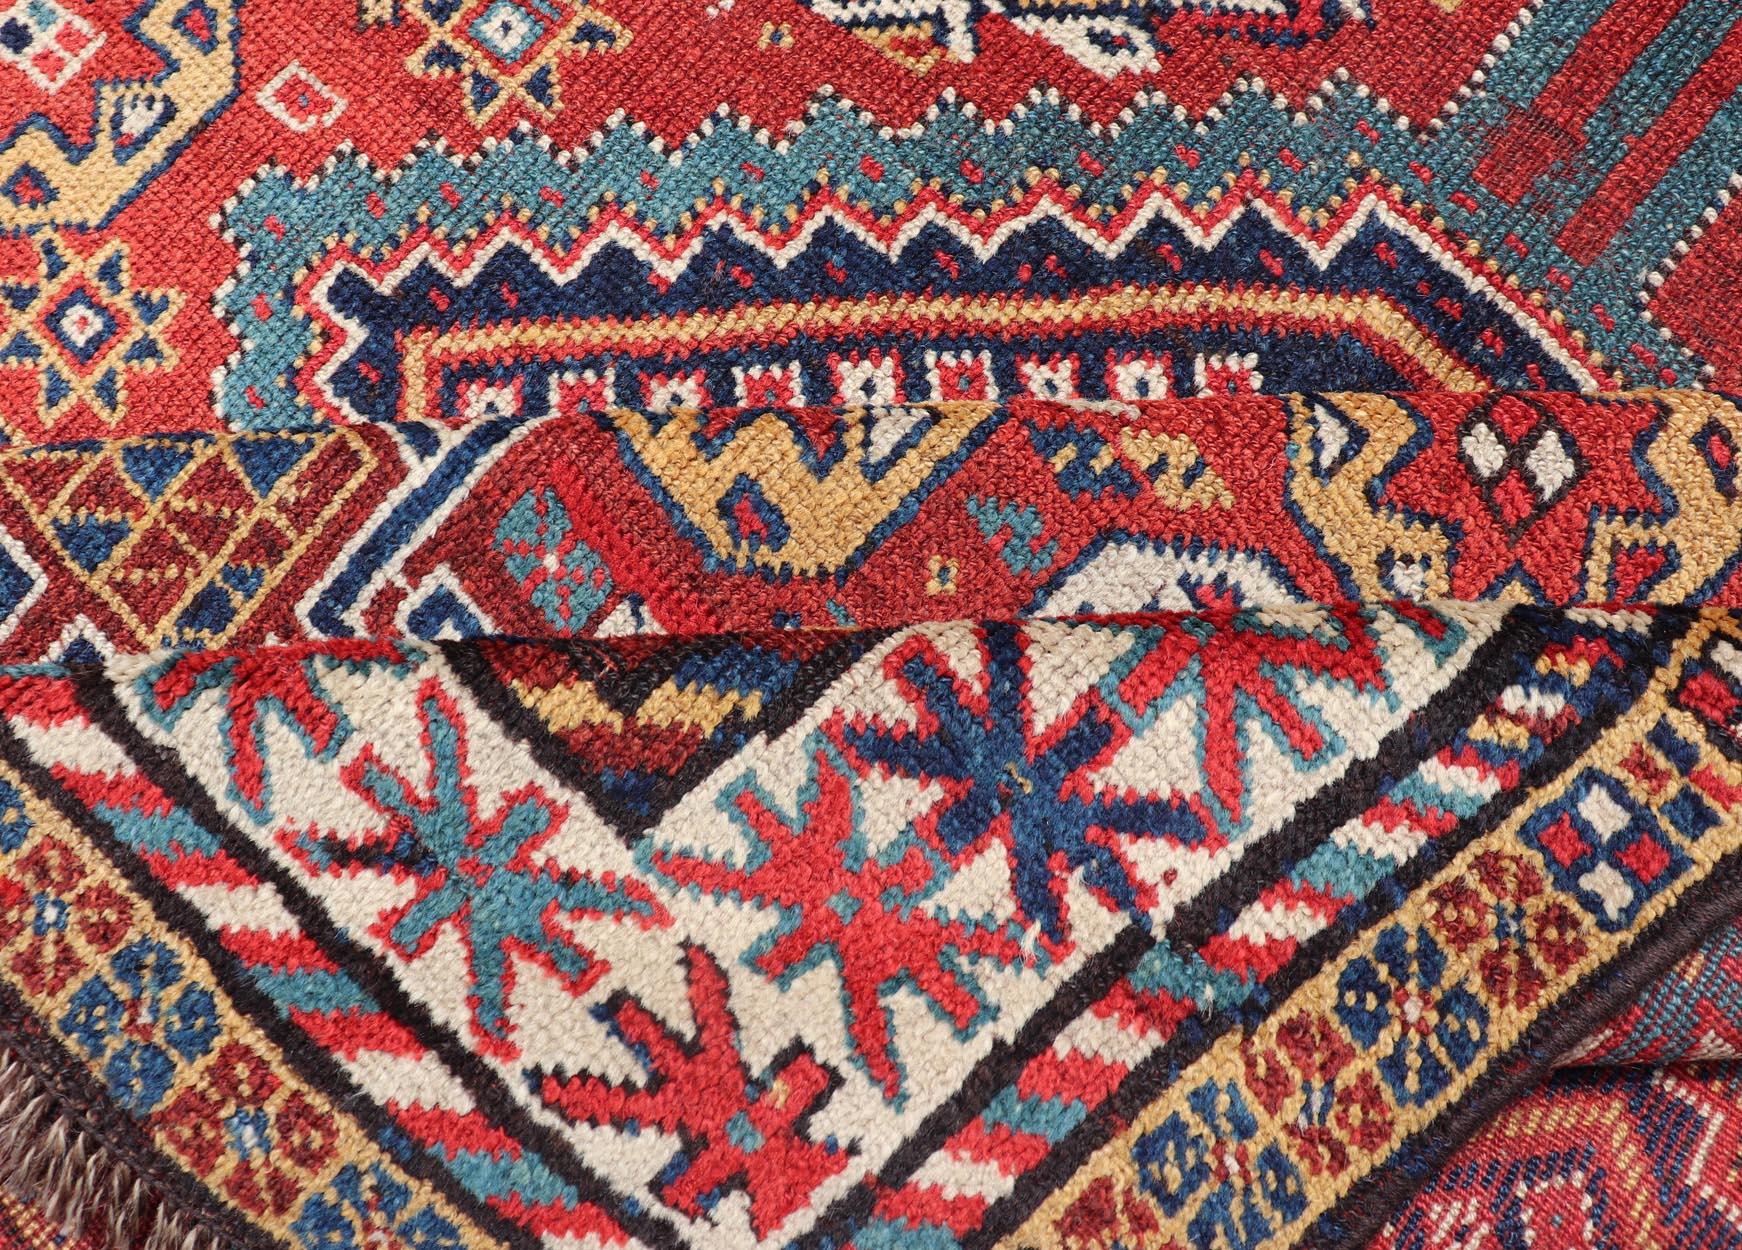 Unique Antique Qashqai Rug with Geometric Motifs in Red, Blue, and Golden Yellow For Sale 7